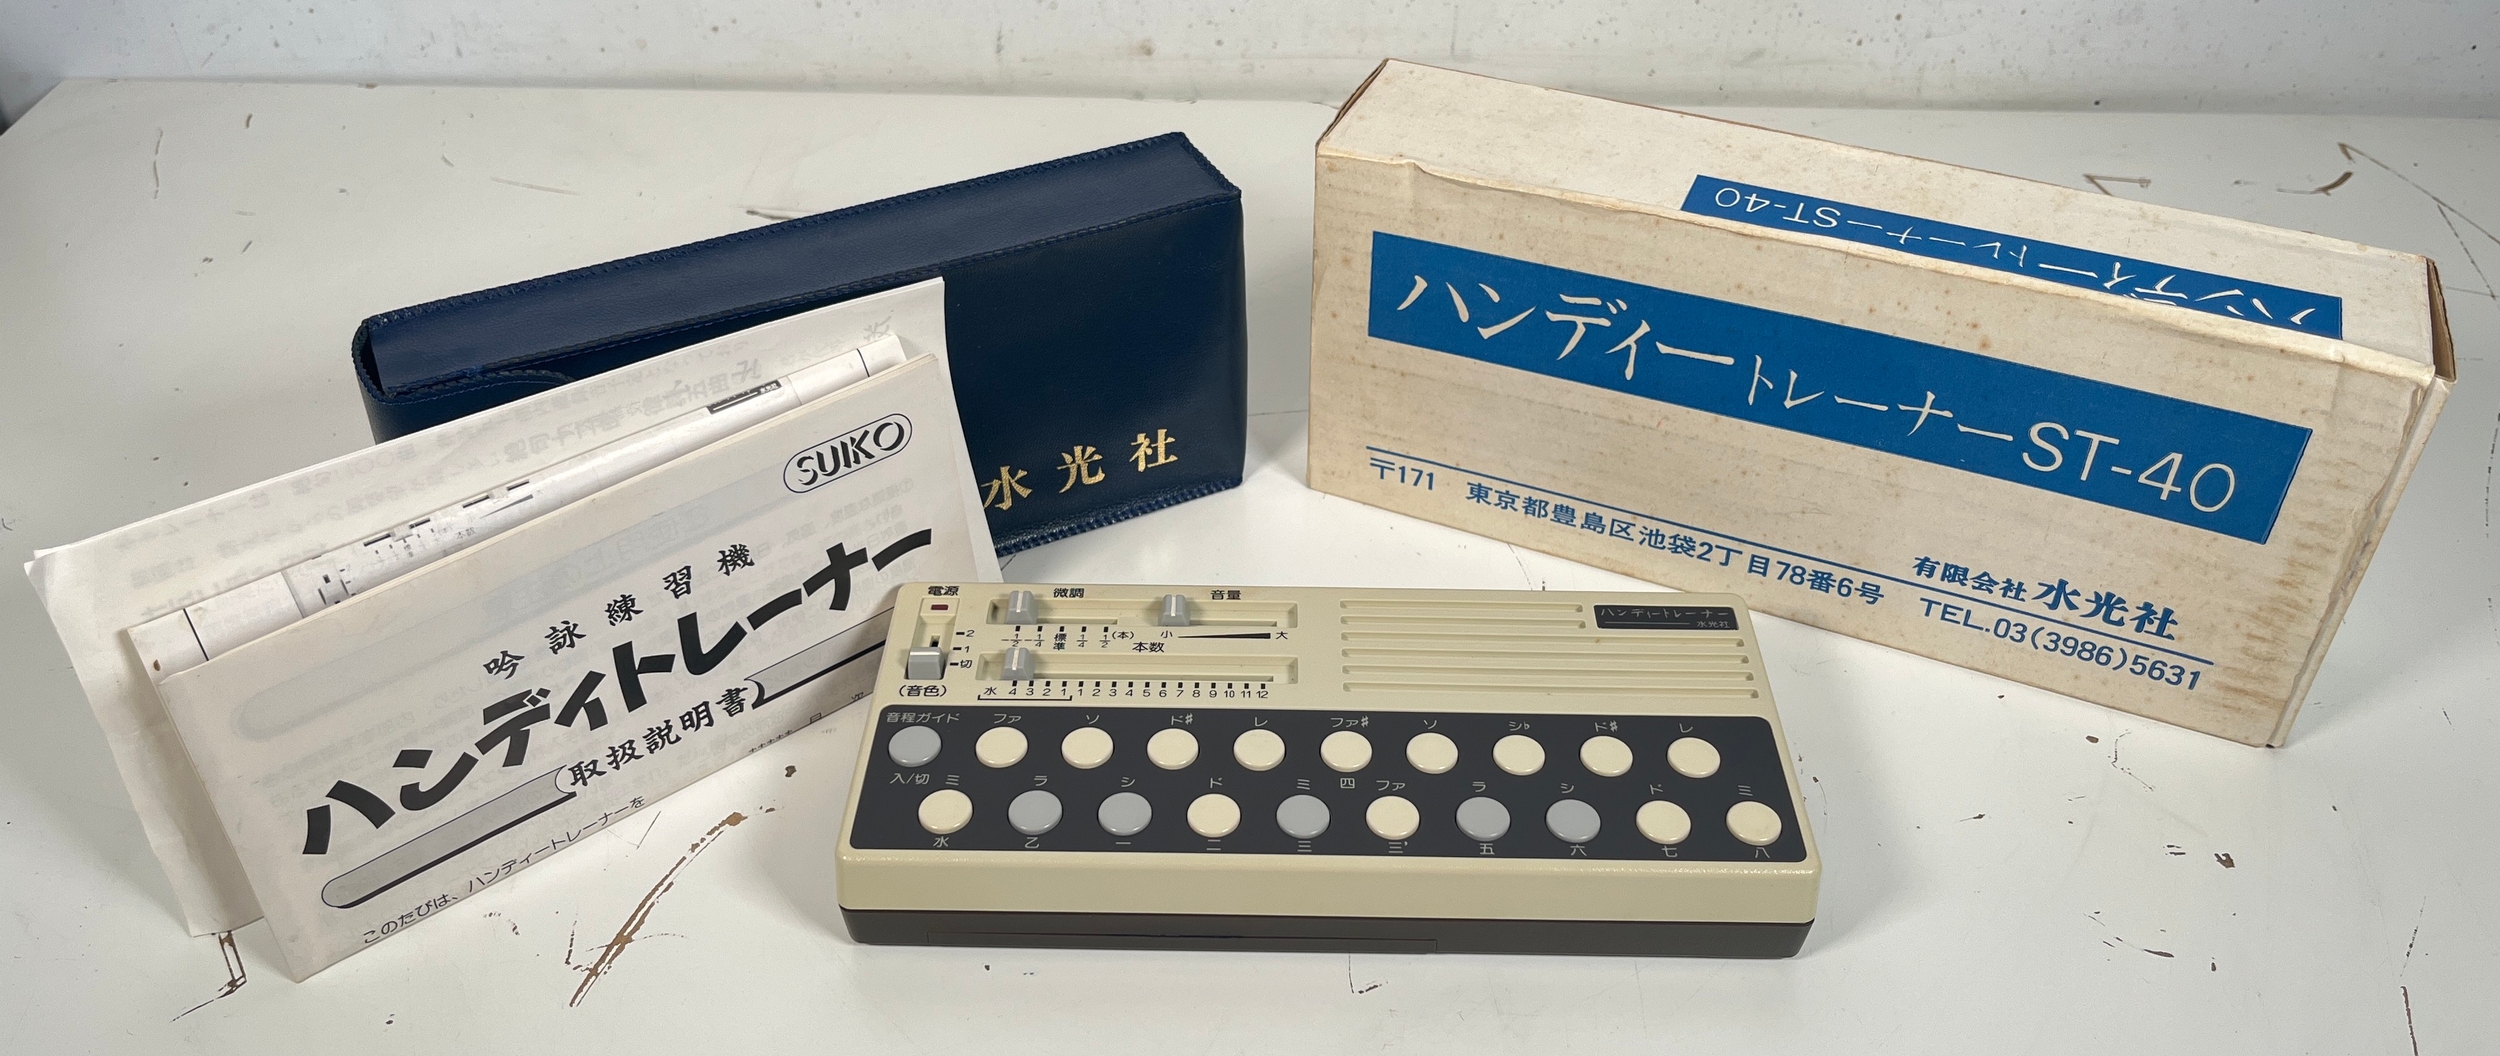 Suiko ST-40 Poetry Trainer, Boxed Pocket version of the inspiring Japanese synth. (C) Tested. Powers